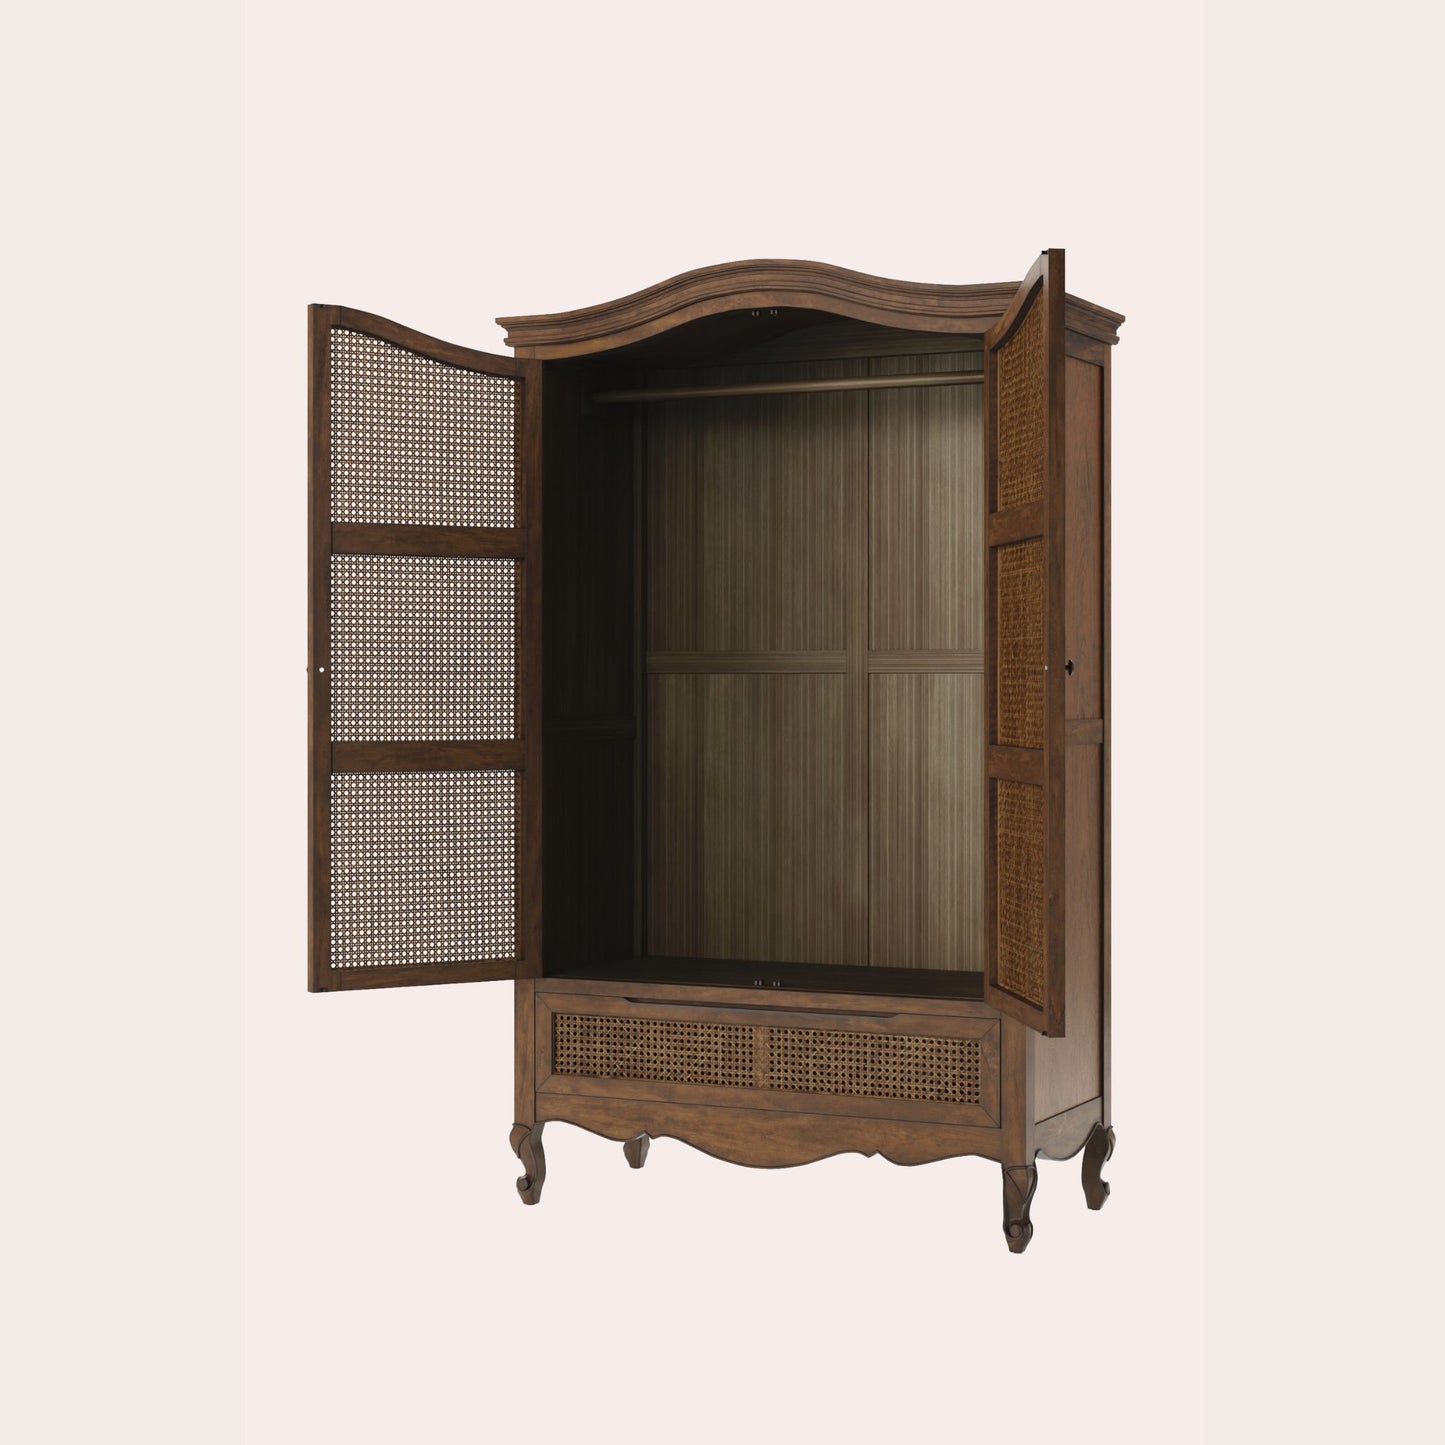 Walnut wardrobe with both doors open showing inside complete with hanging rail